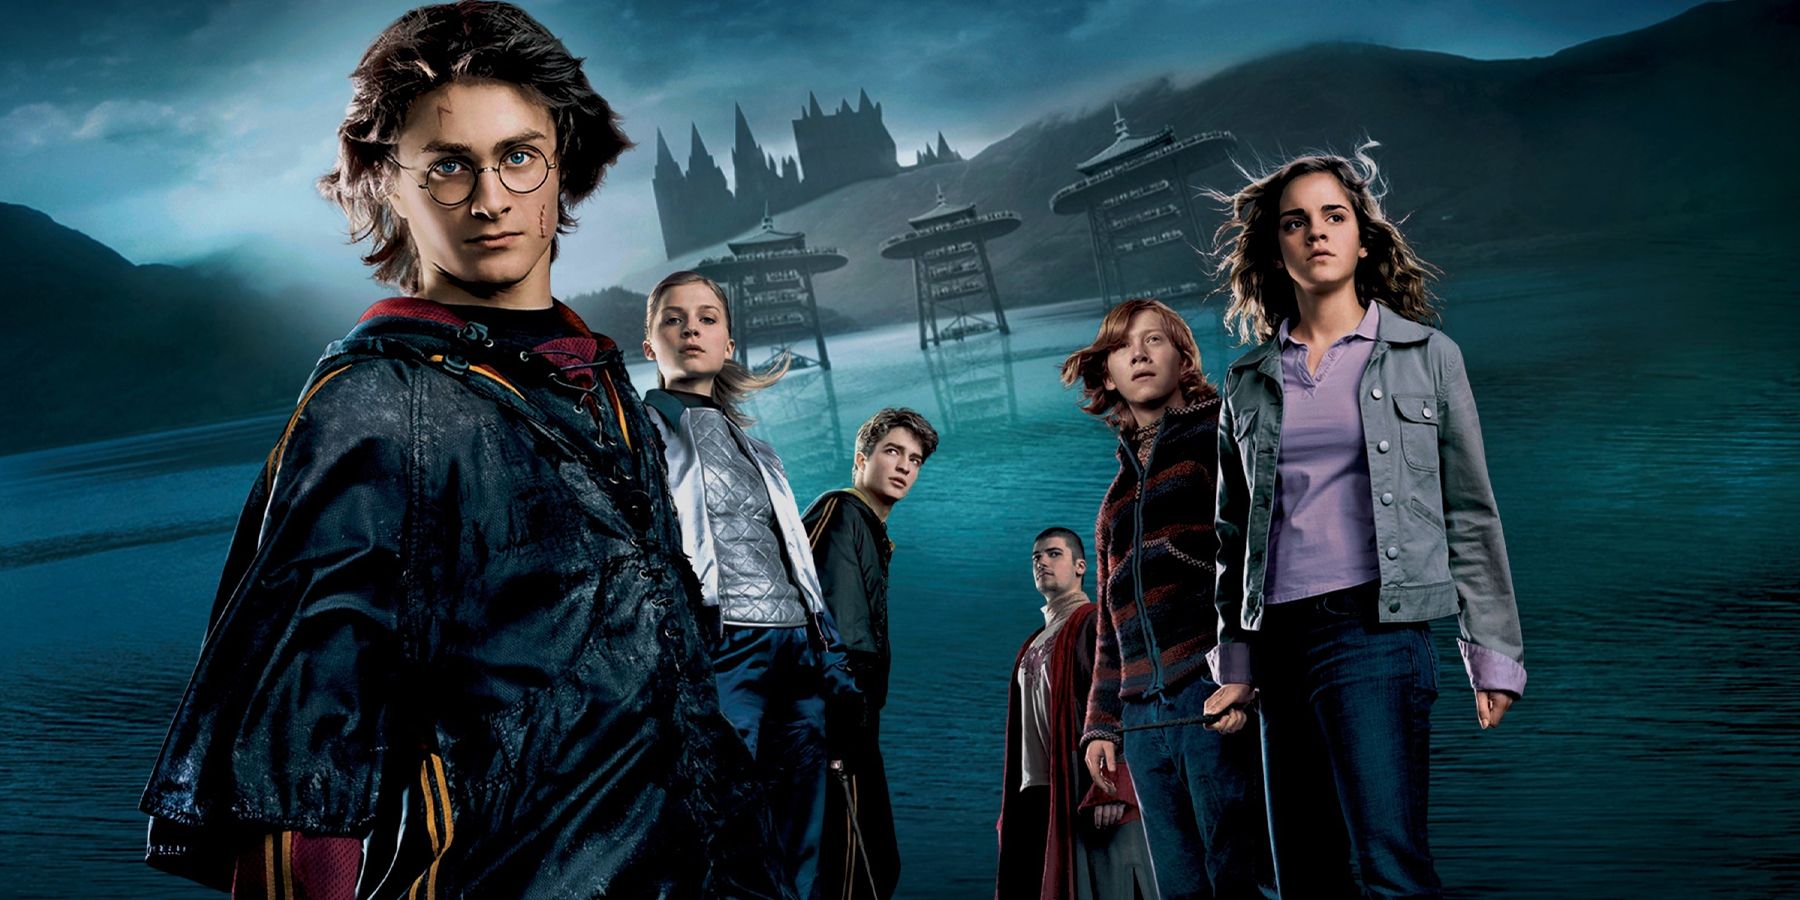 Harry Potter And The Goblet Of Fire movie cast